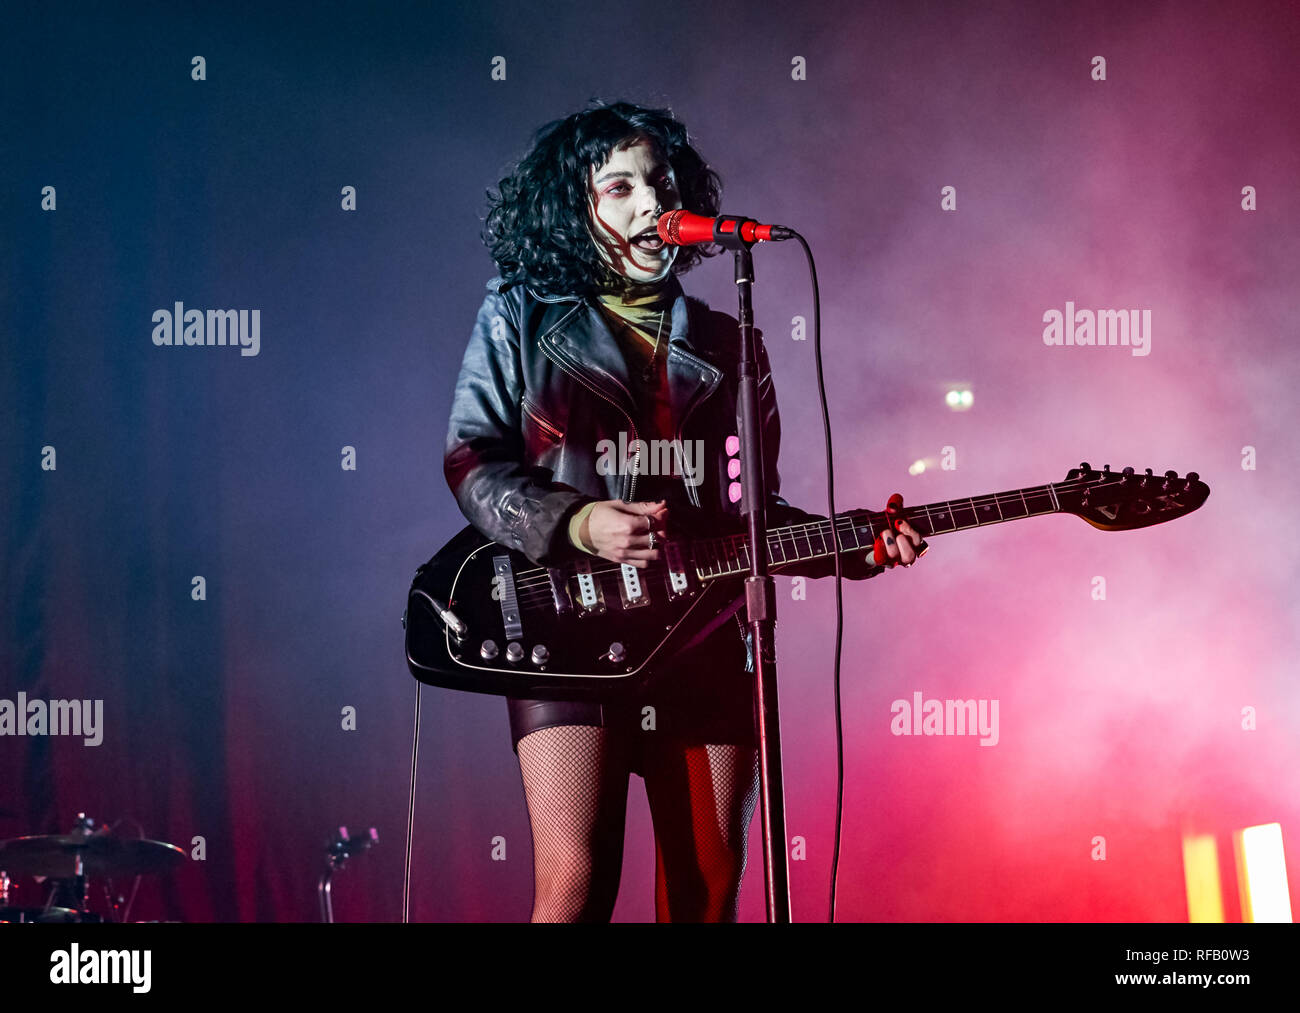 Manchester, England, UK. January 24, 2019 - HEATHER BARON-GRACIE of UK band  ''PALE WAVES '' performing a sold out show at the Manchester Arena, UK  supoorting ''The 1975' Credit: Andy Von Pip/ZUMA